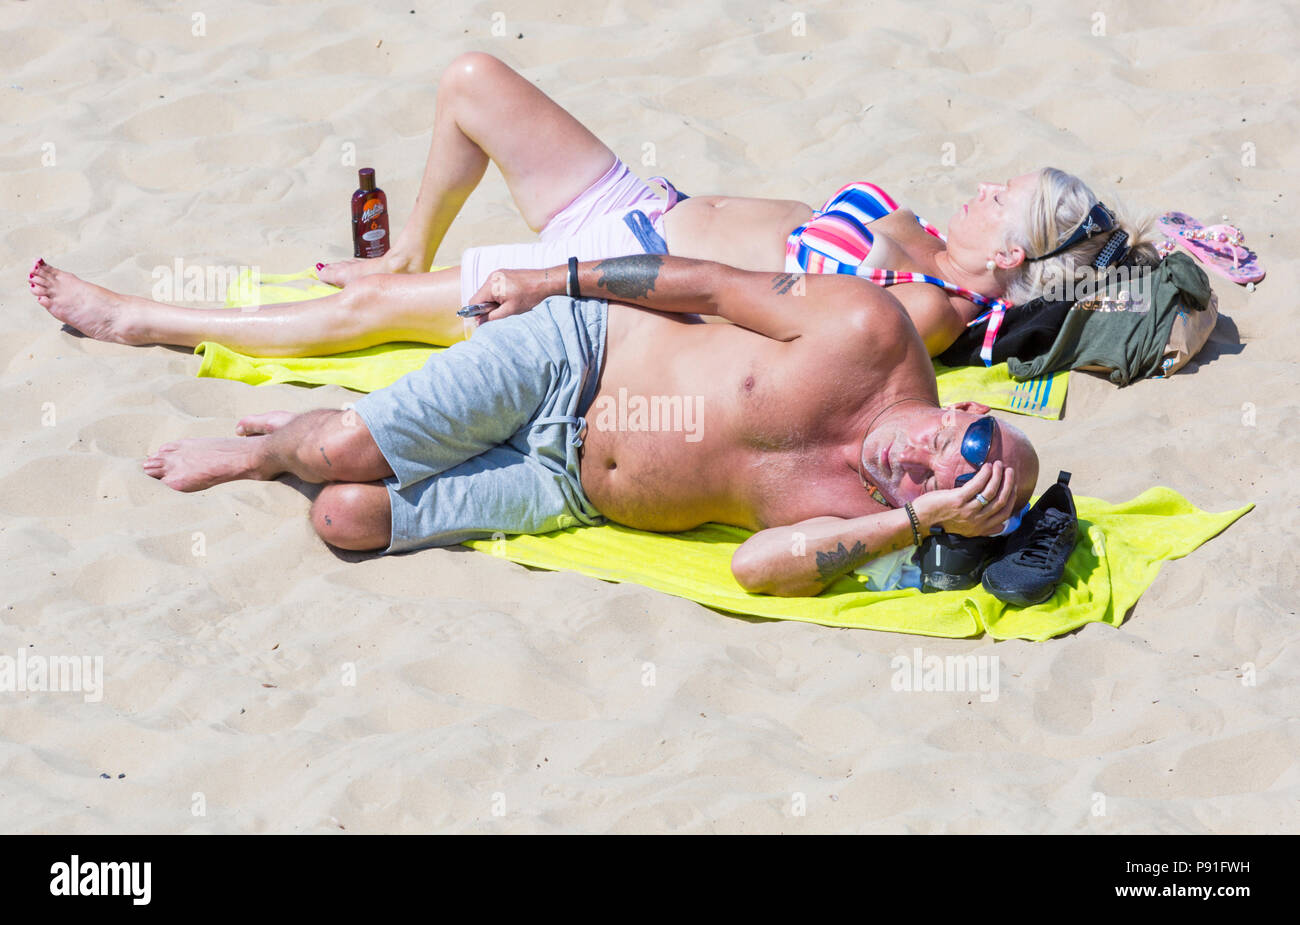 Bournemouth, Dorset, UK. 14th July 2018. UK weather: The heatwave continues with another hot sunny day, as sunseekers make the most of the glorious weather and head to the seaside at Bournemouth beaches. Couple sunbathing on beach. Credit: Carolyn Jenkins/Alamy Live News Stock Photo